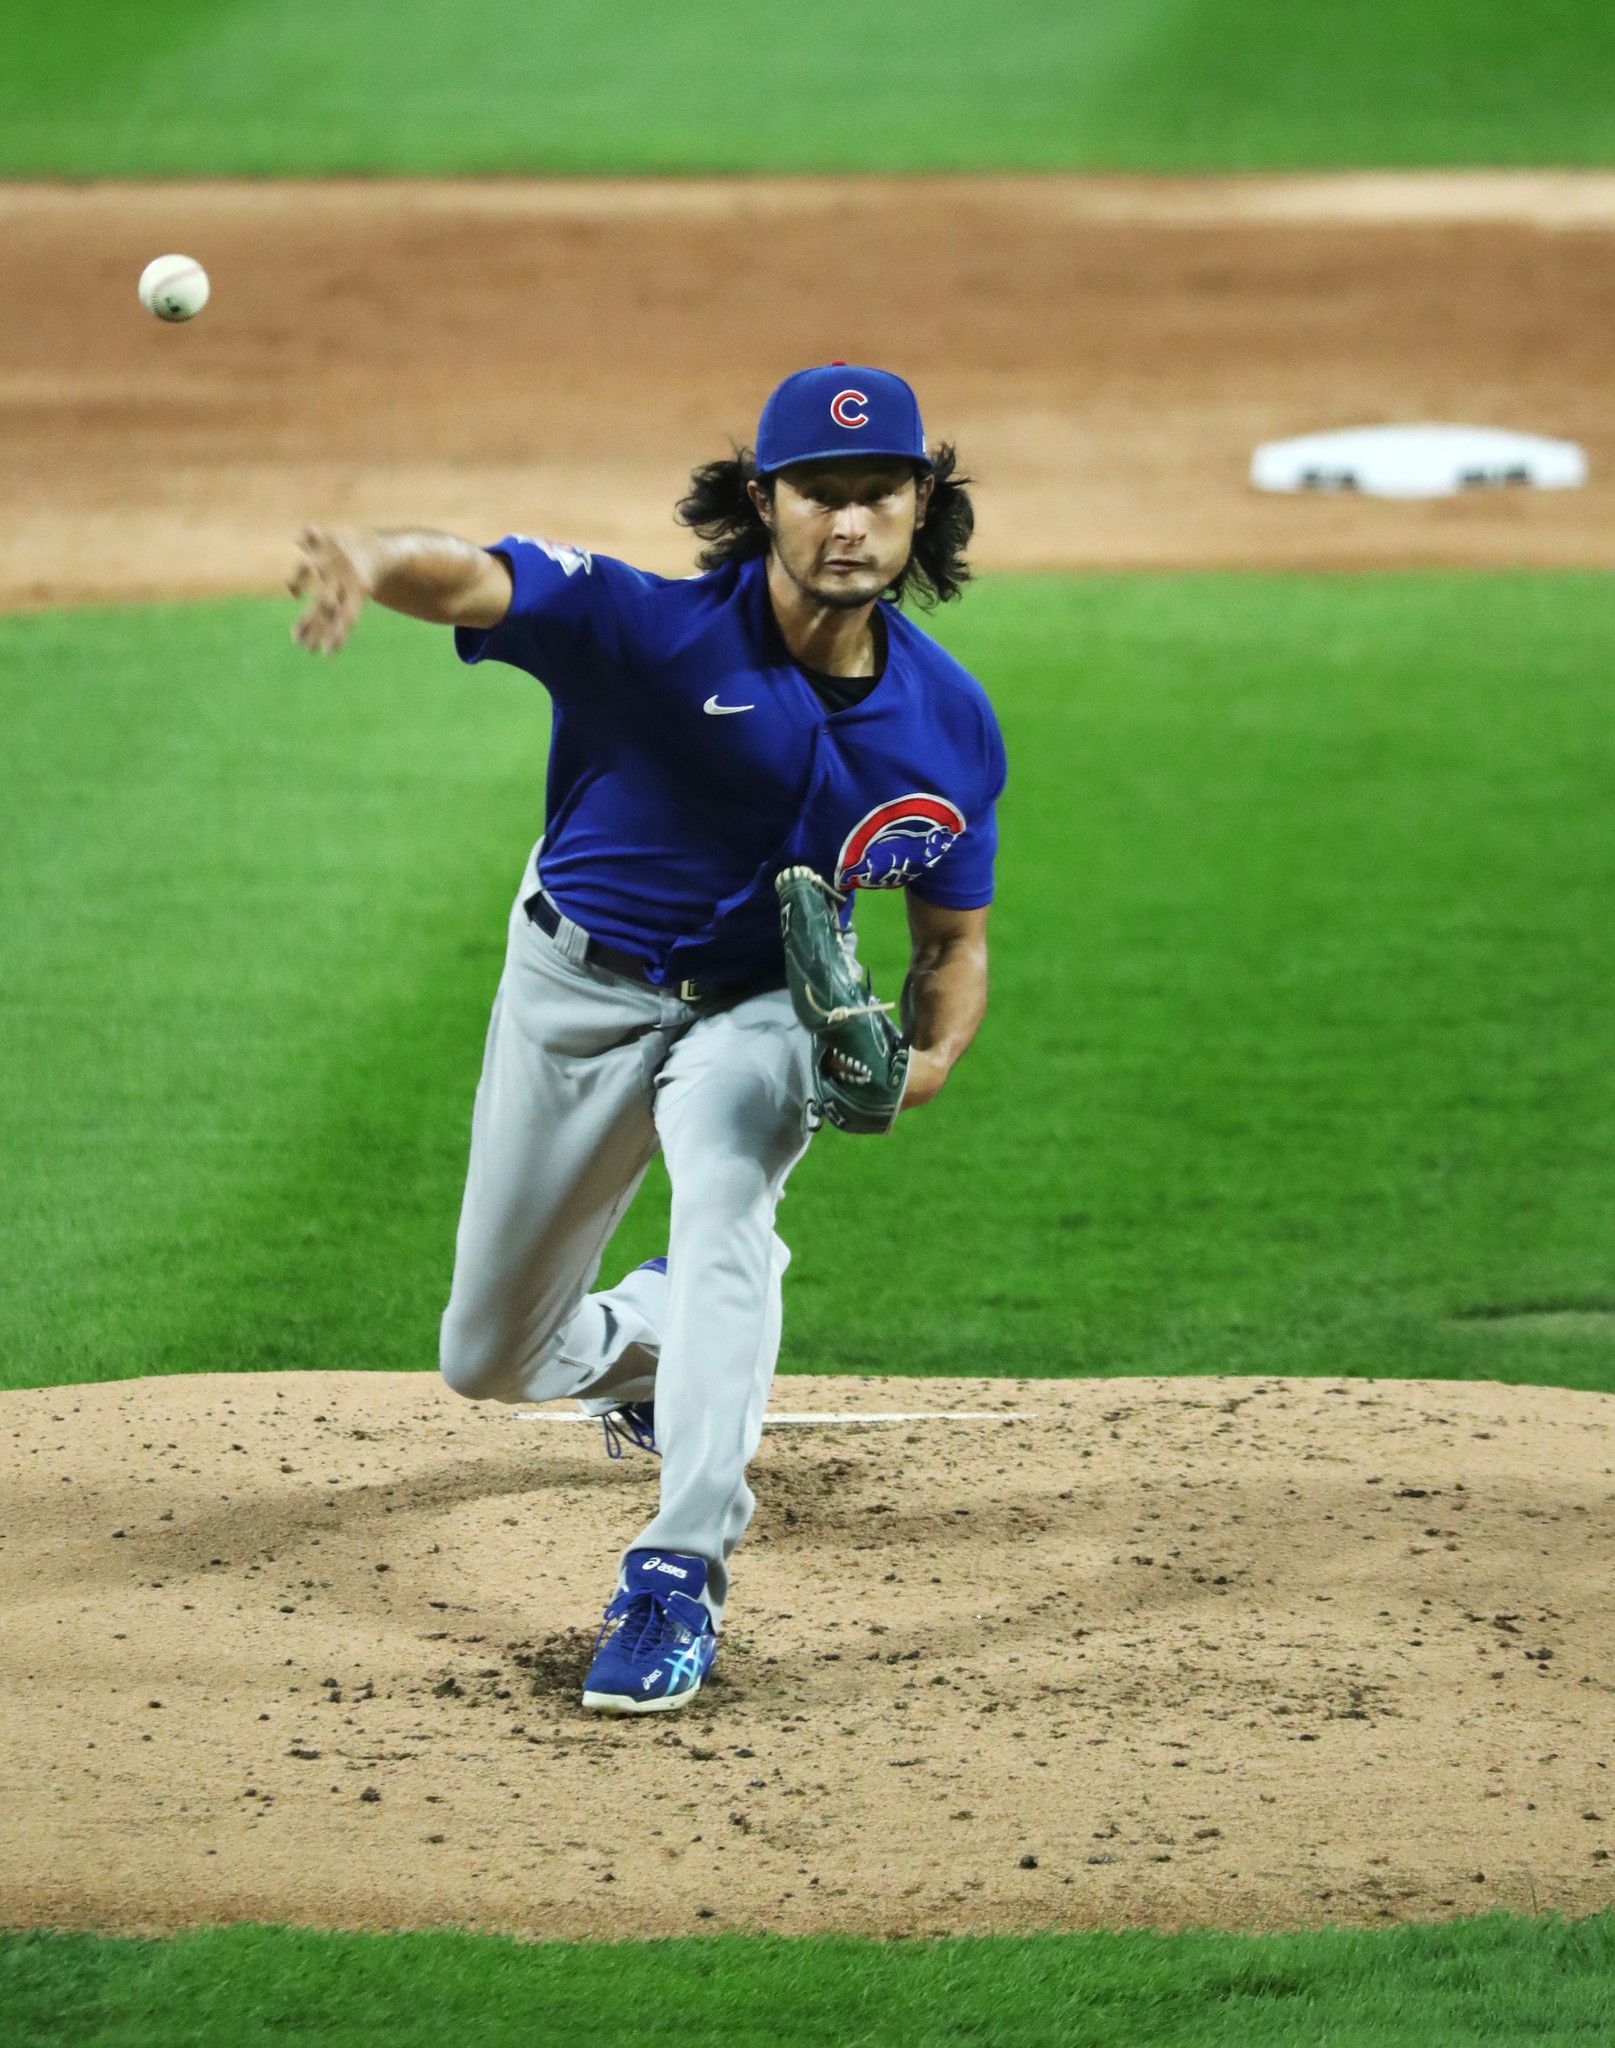 In denying Yu Darvish tall fence around his home, Evanston official says  celebrities shouldn't get special treatment